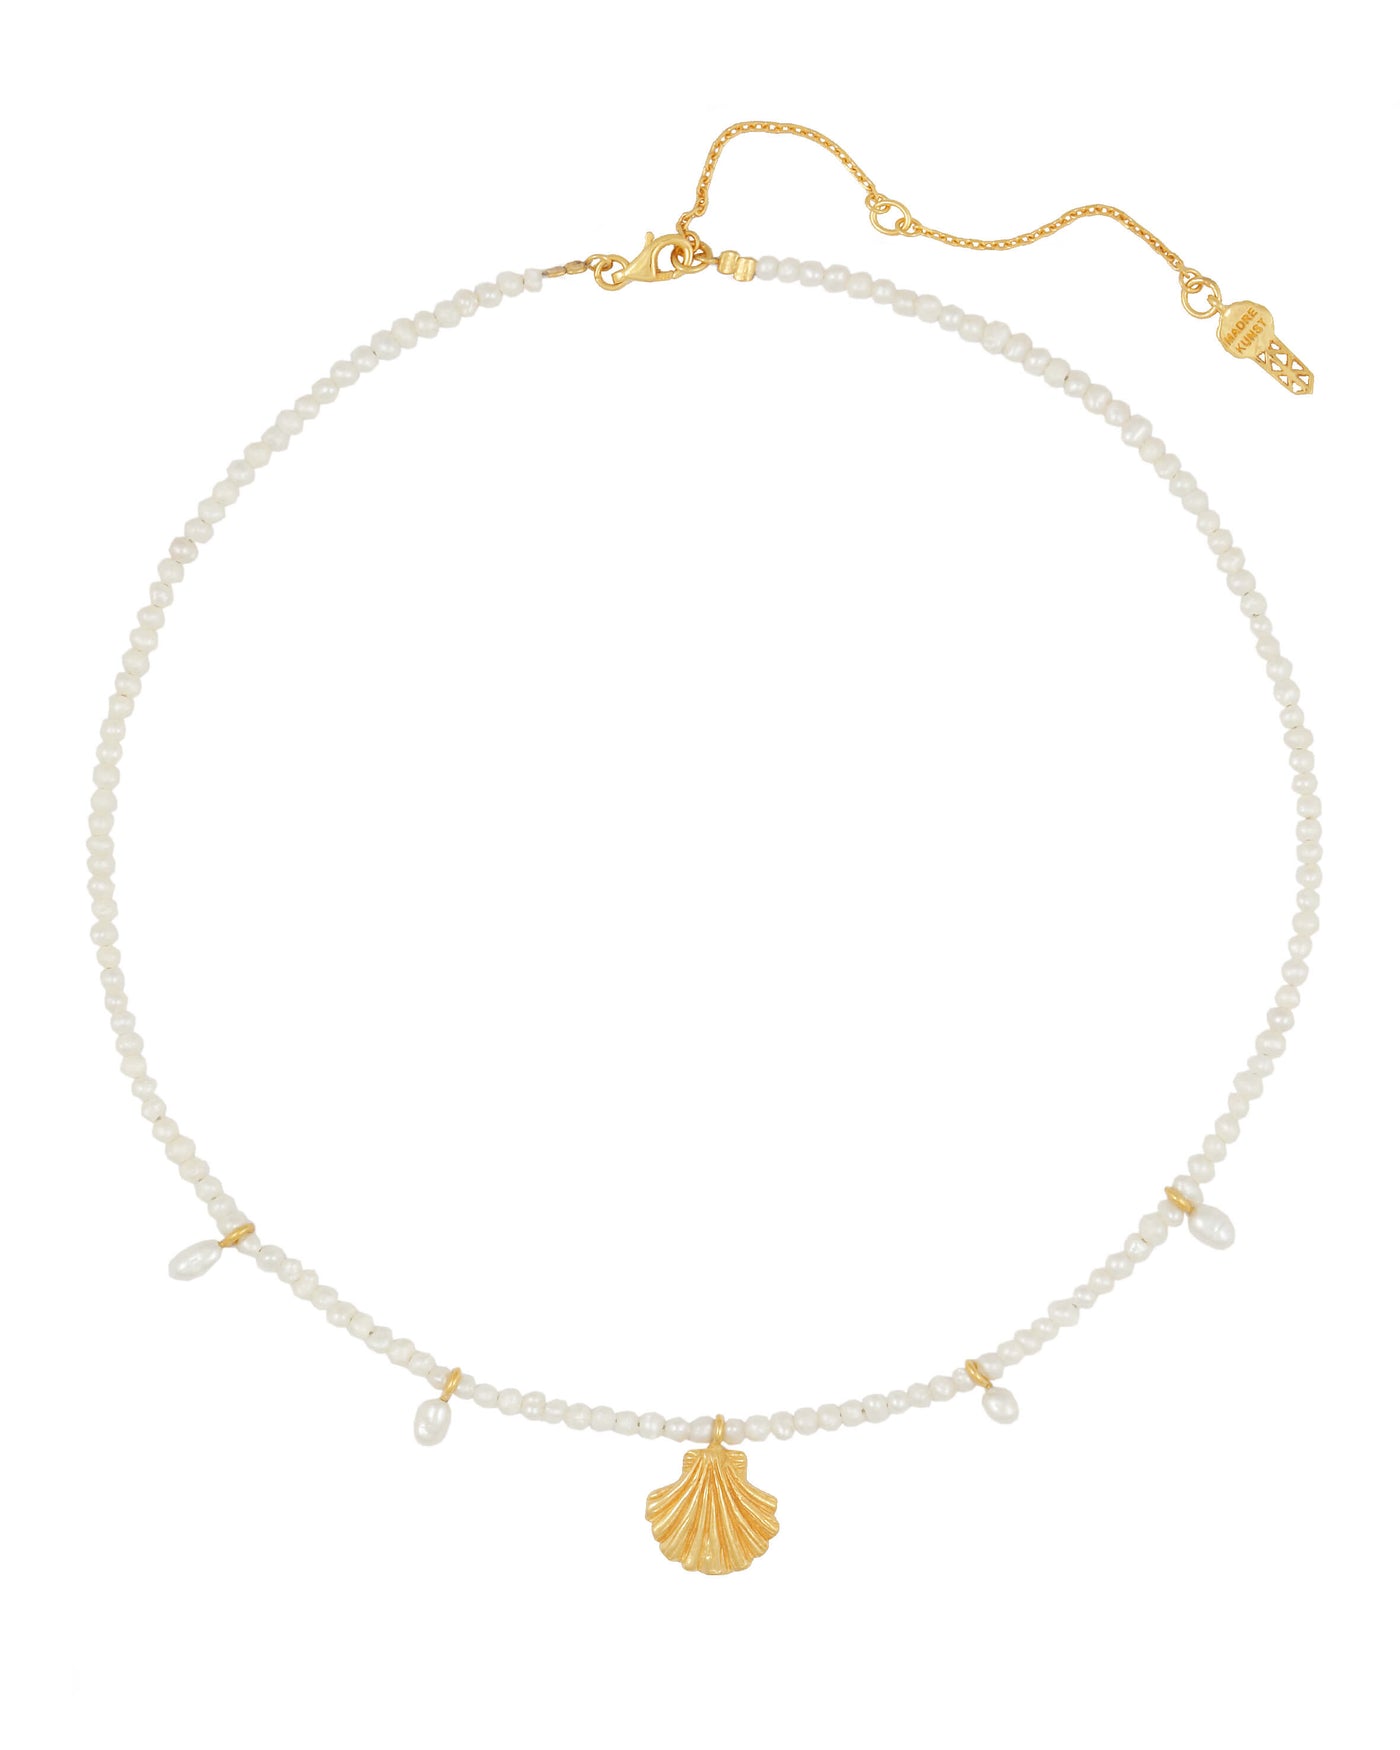 Clam shell with pearls pearl choker. Silver, gold-plated